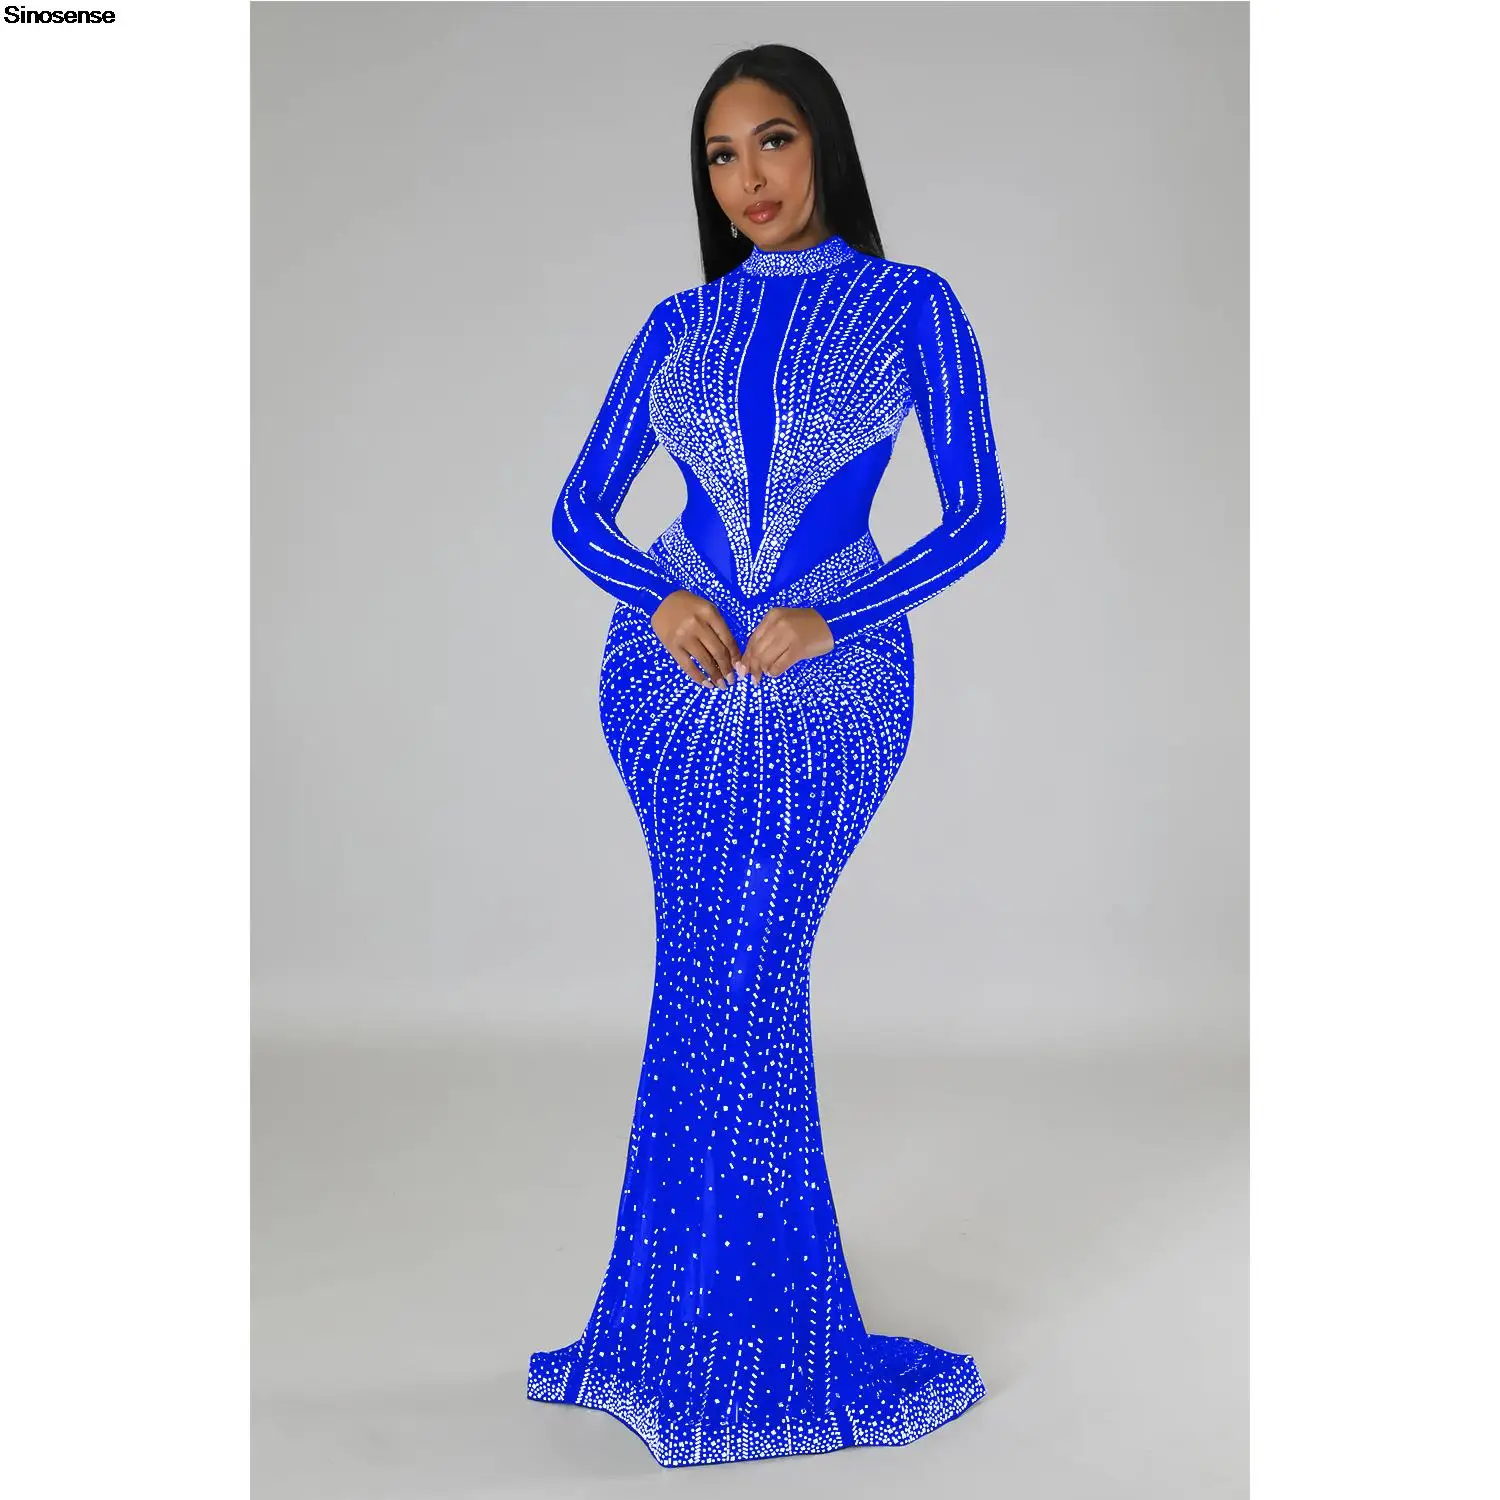 Women's Long Sleeve Party Cocktail Evening Prom Gown Mermaid Maxi Dress Sexy Mesh See Through Rhinestone Night Club Party Dress